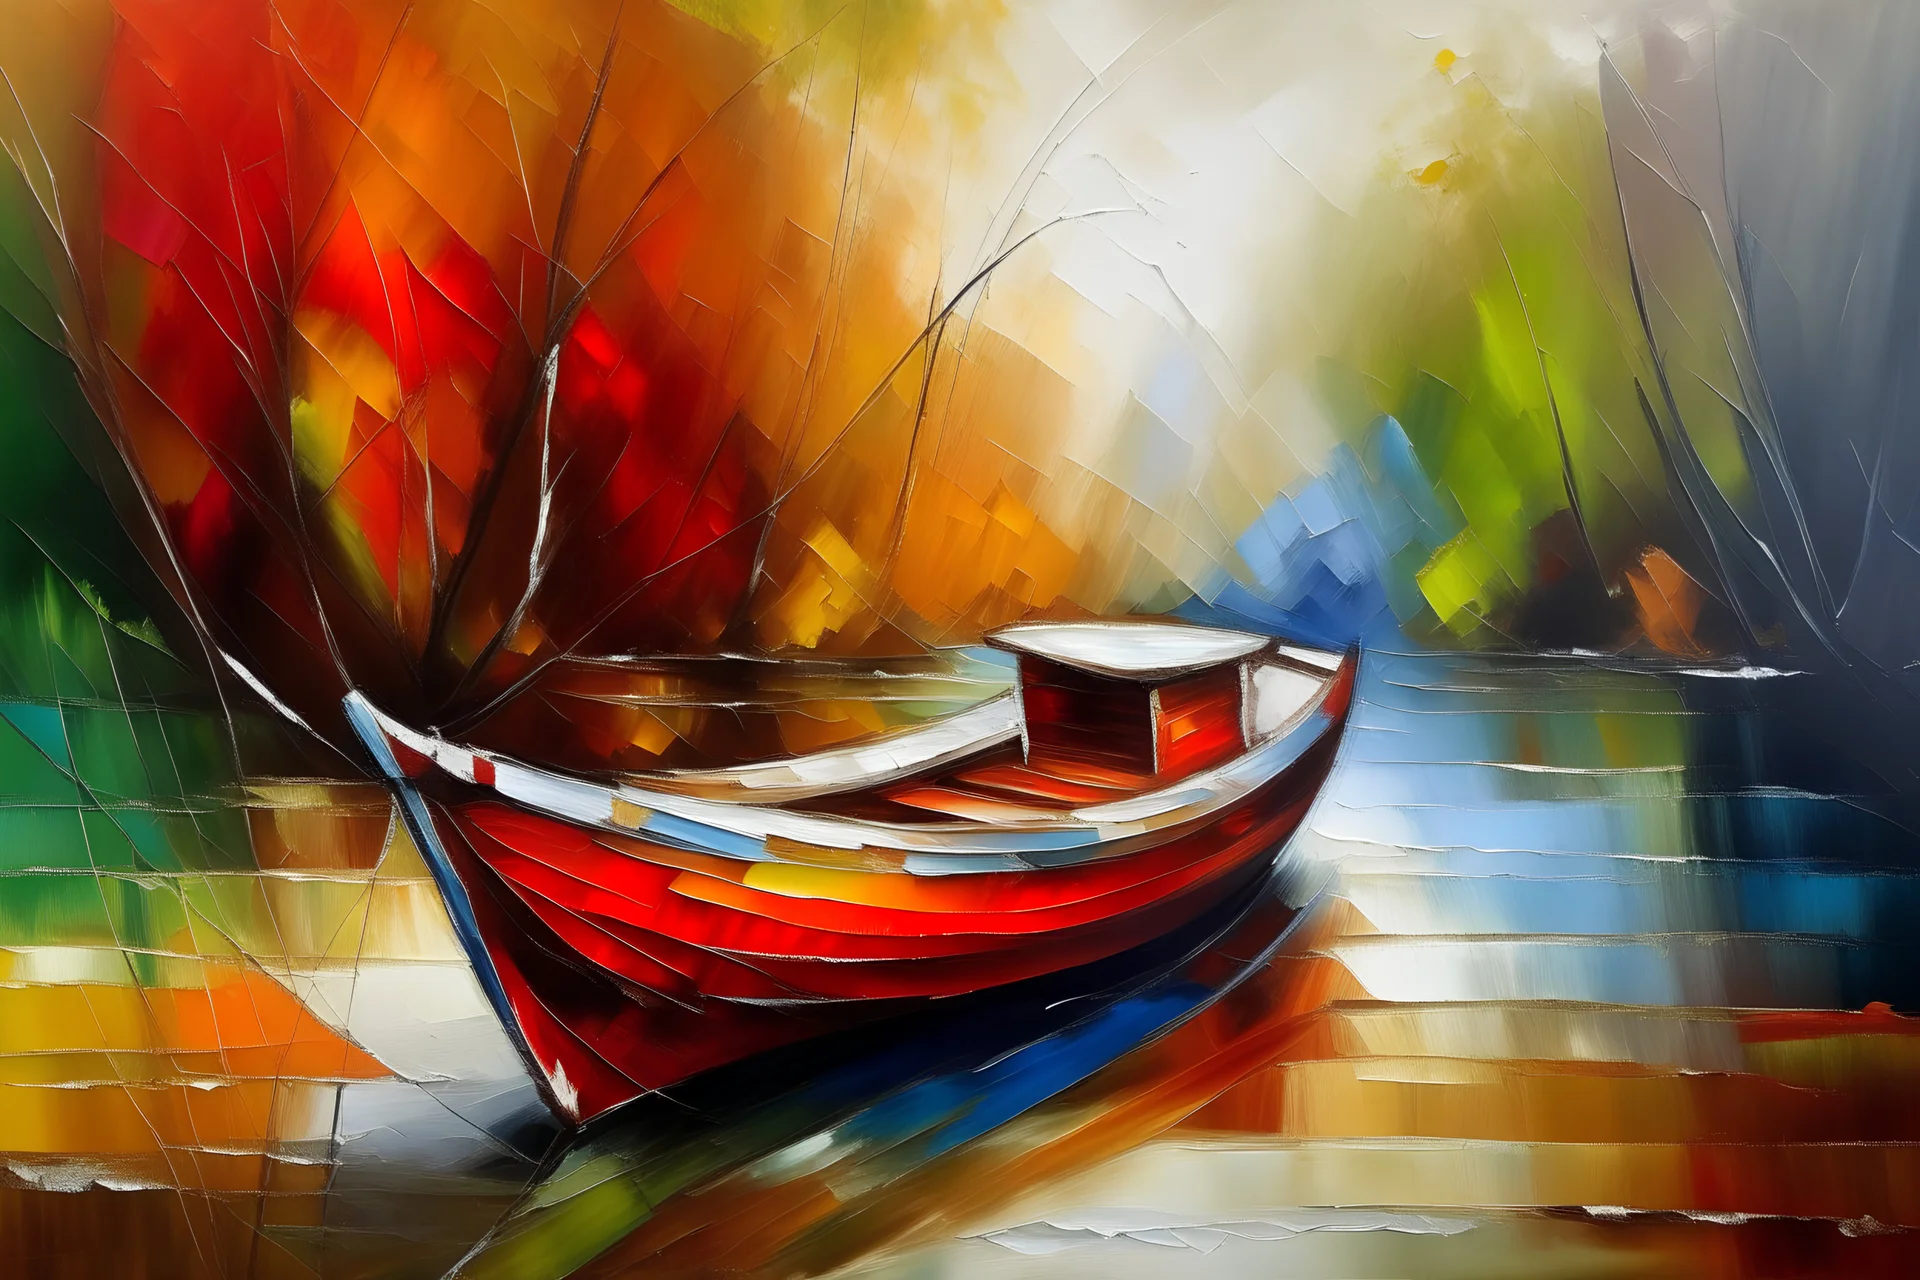 abstract painting boat by the river